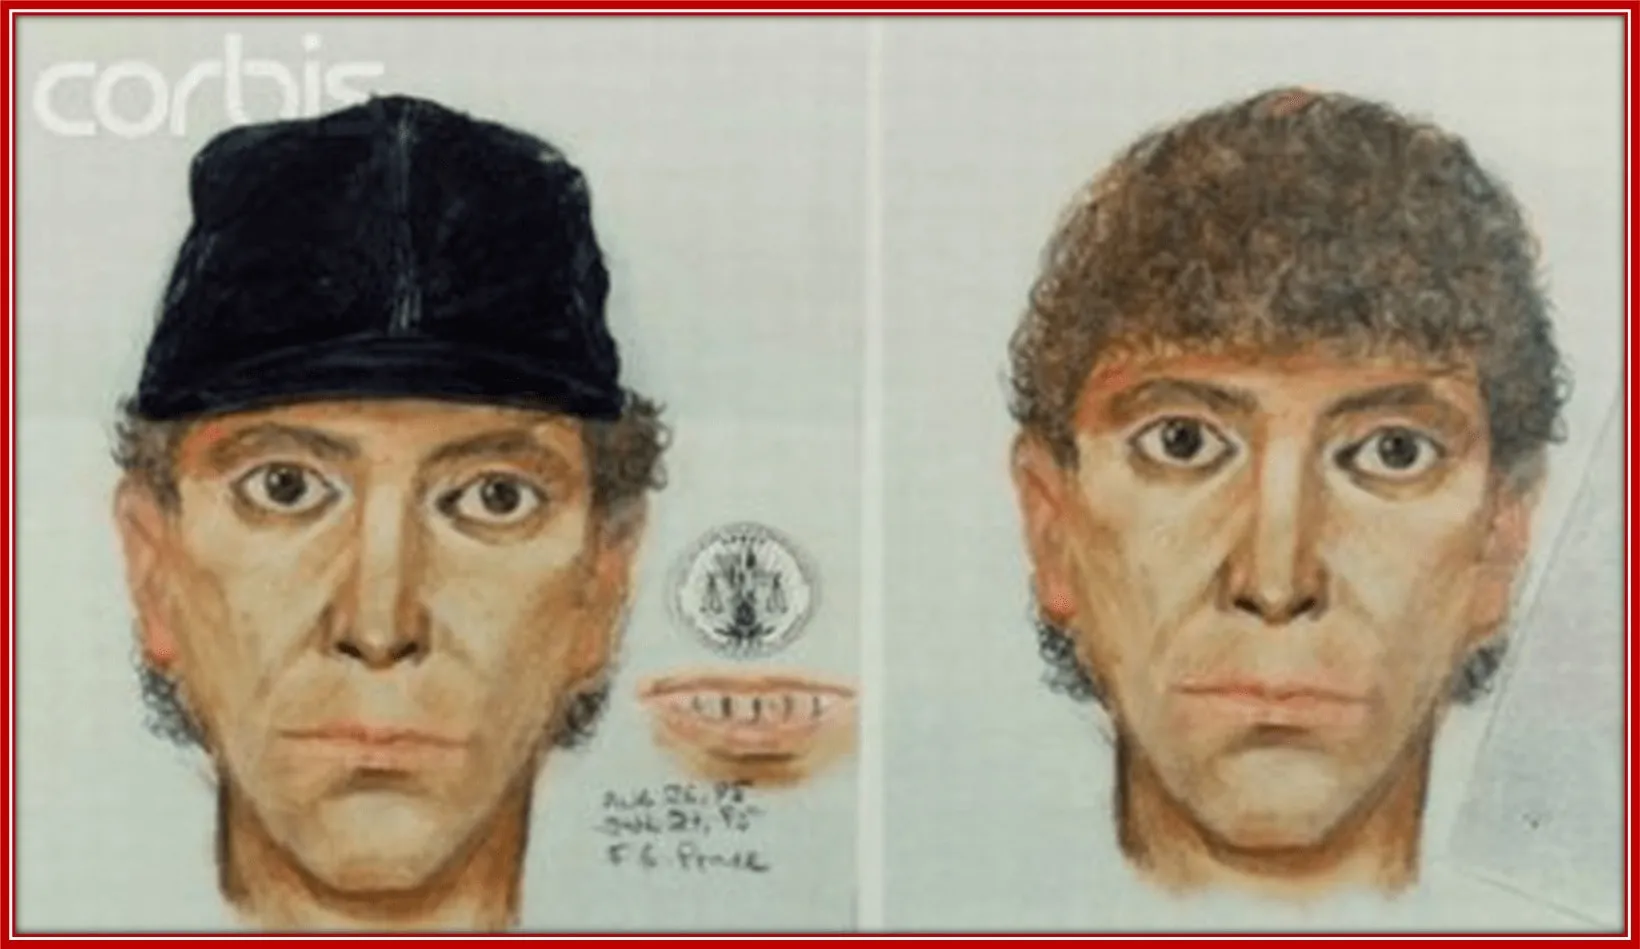 A drawing of the Night Stalker-suspect by a Los Angeles Police Department artist.